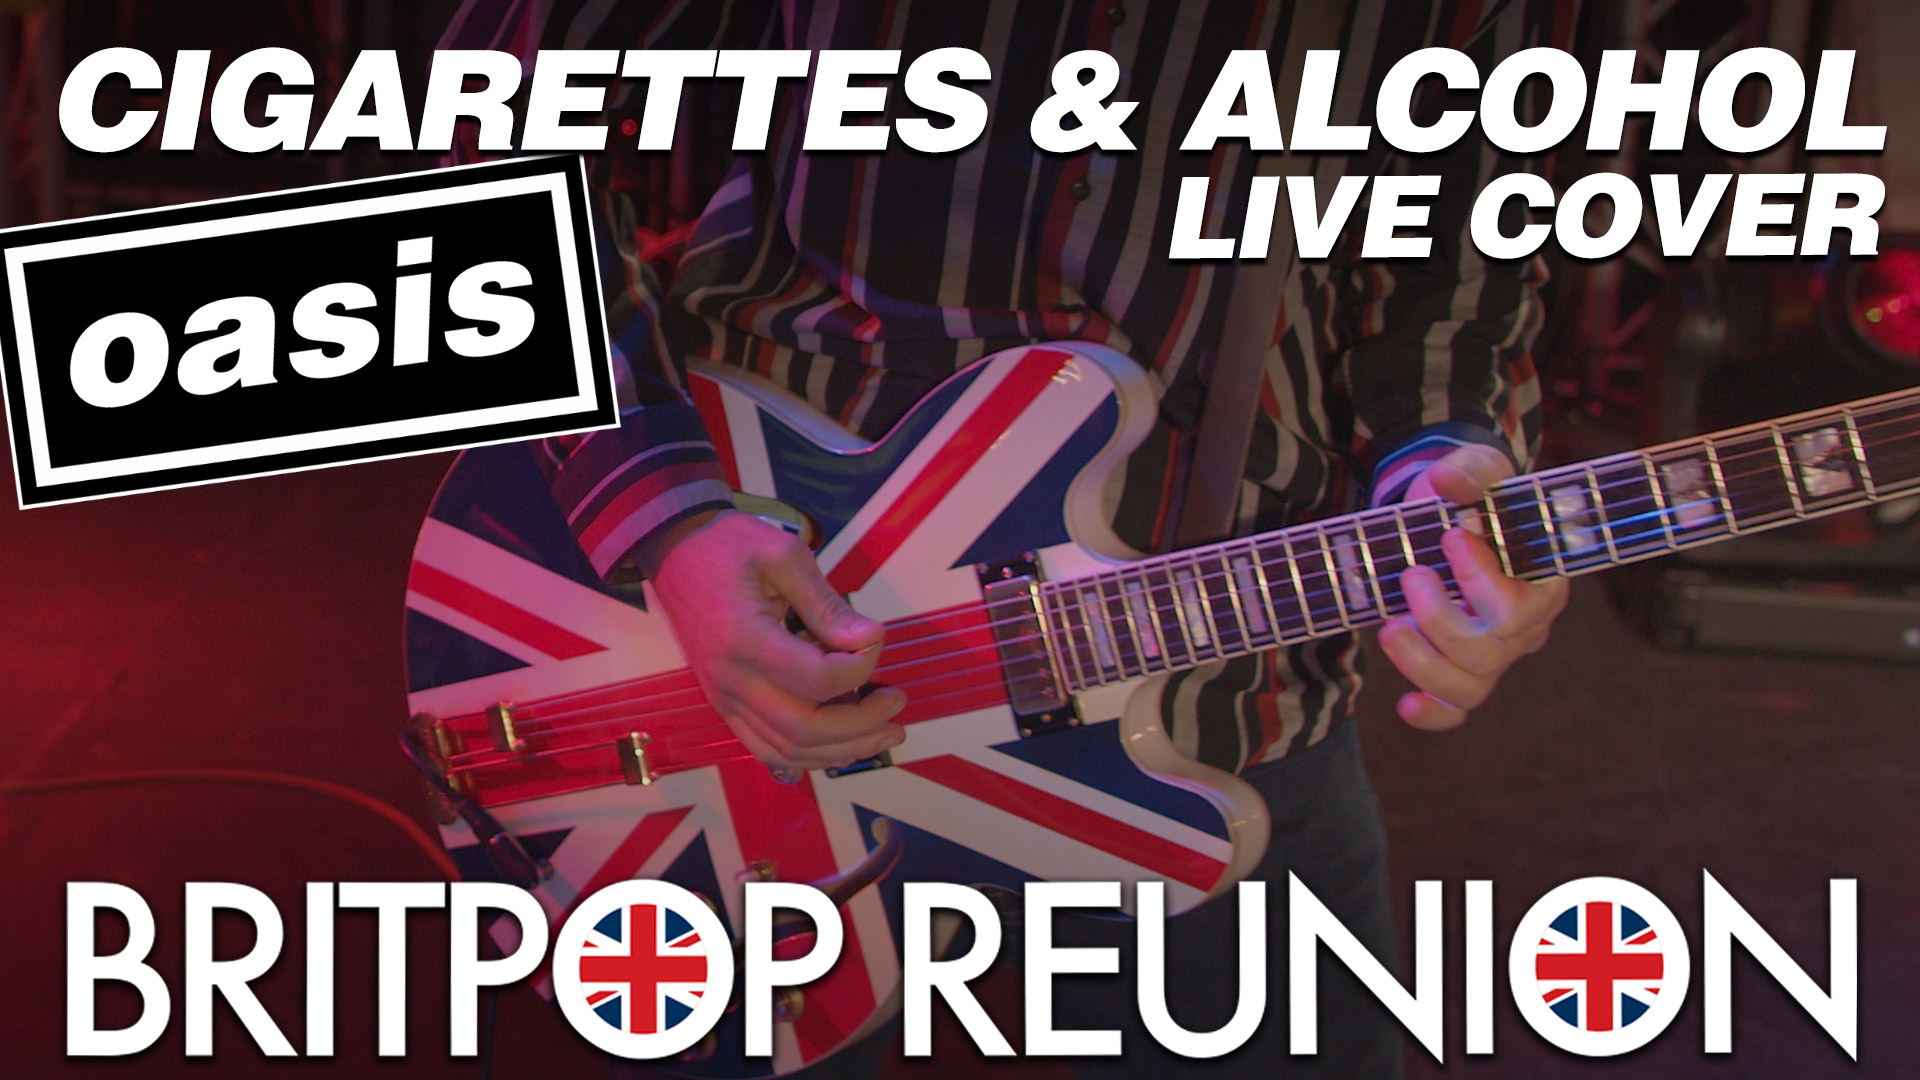 Cigarettes & Alcohol by Oasis Cover Version by Britpop Tribute Band